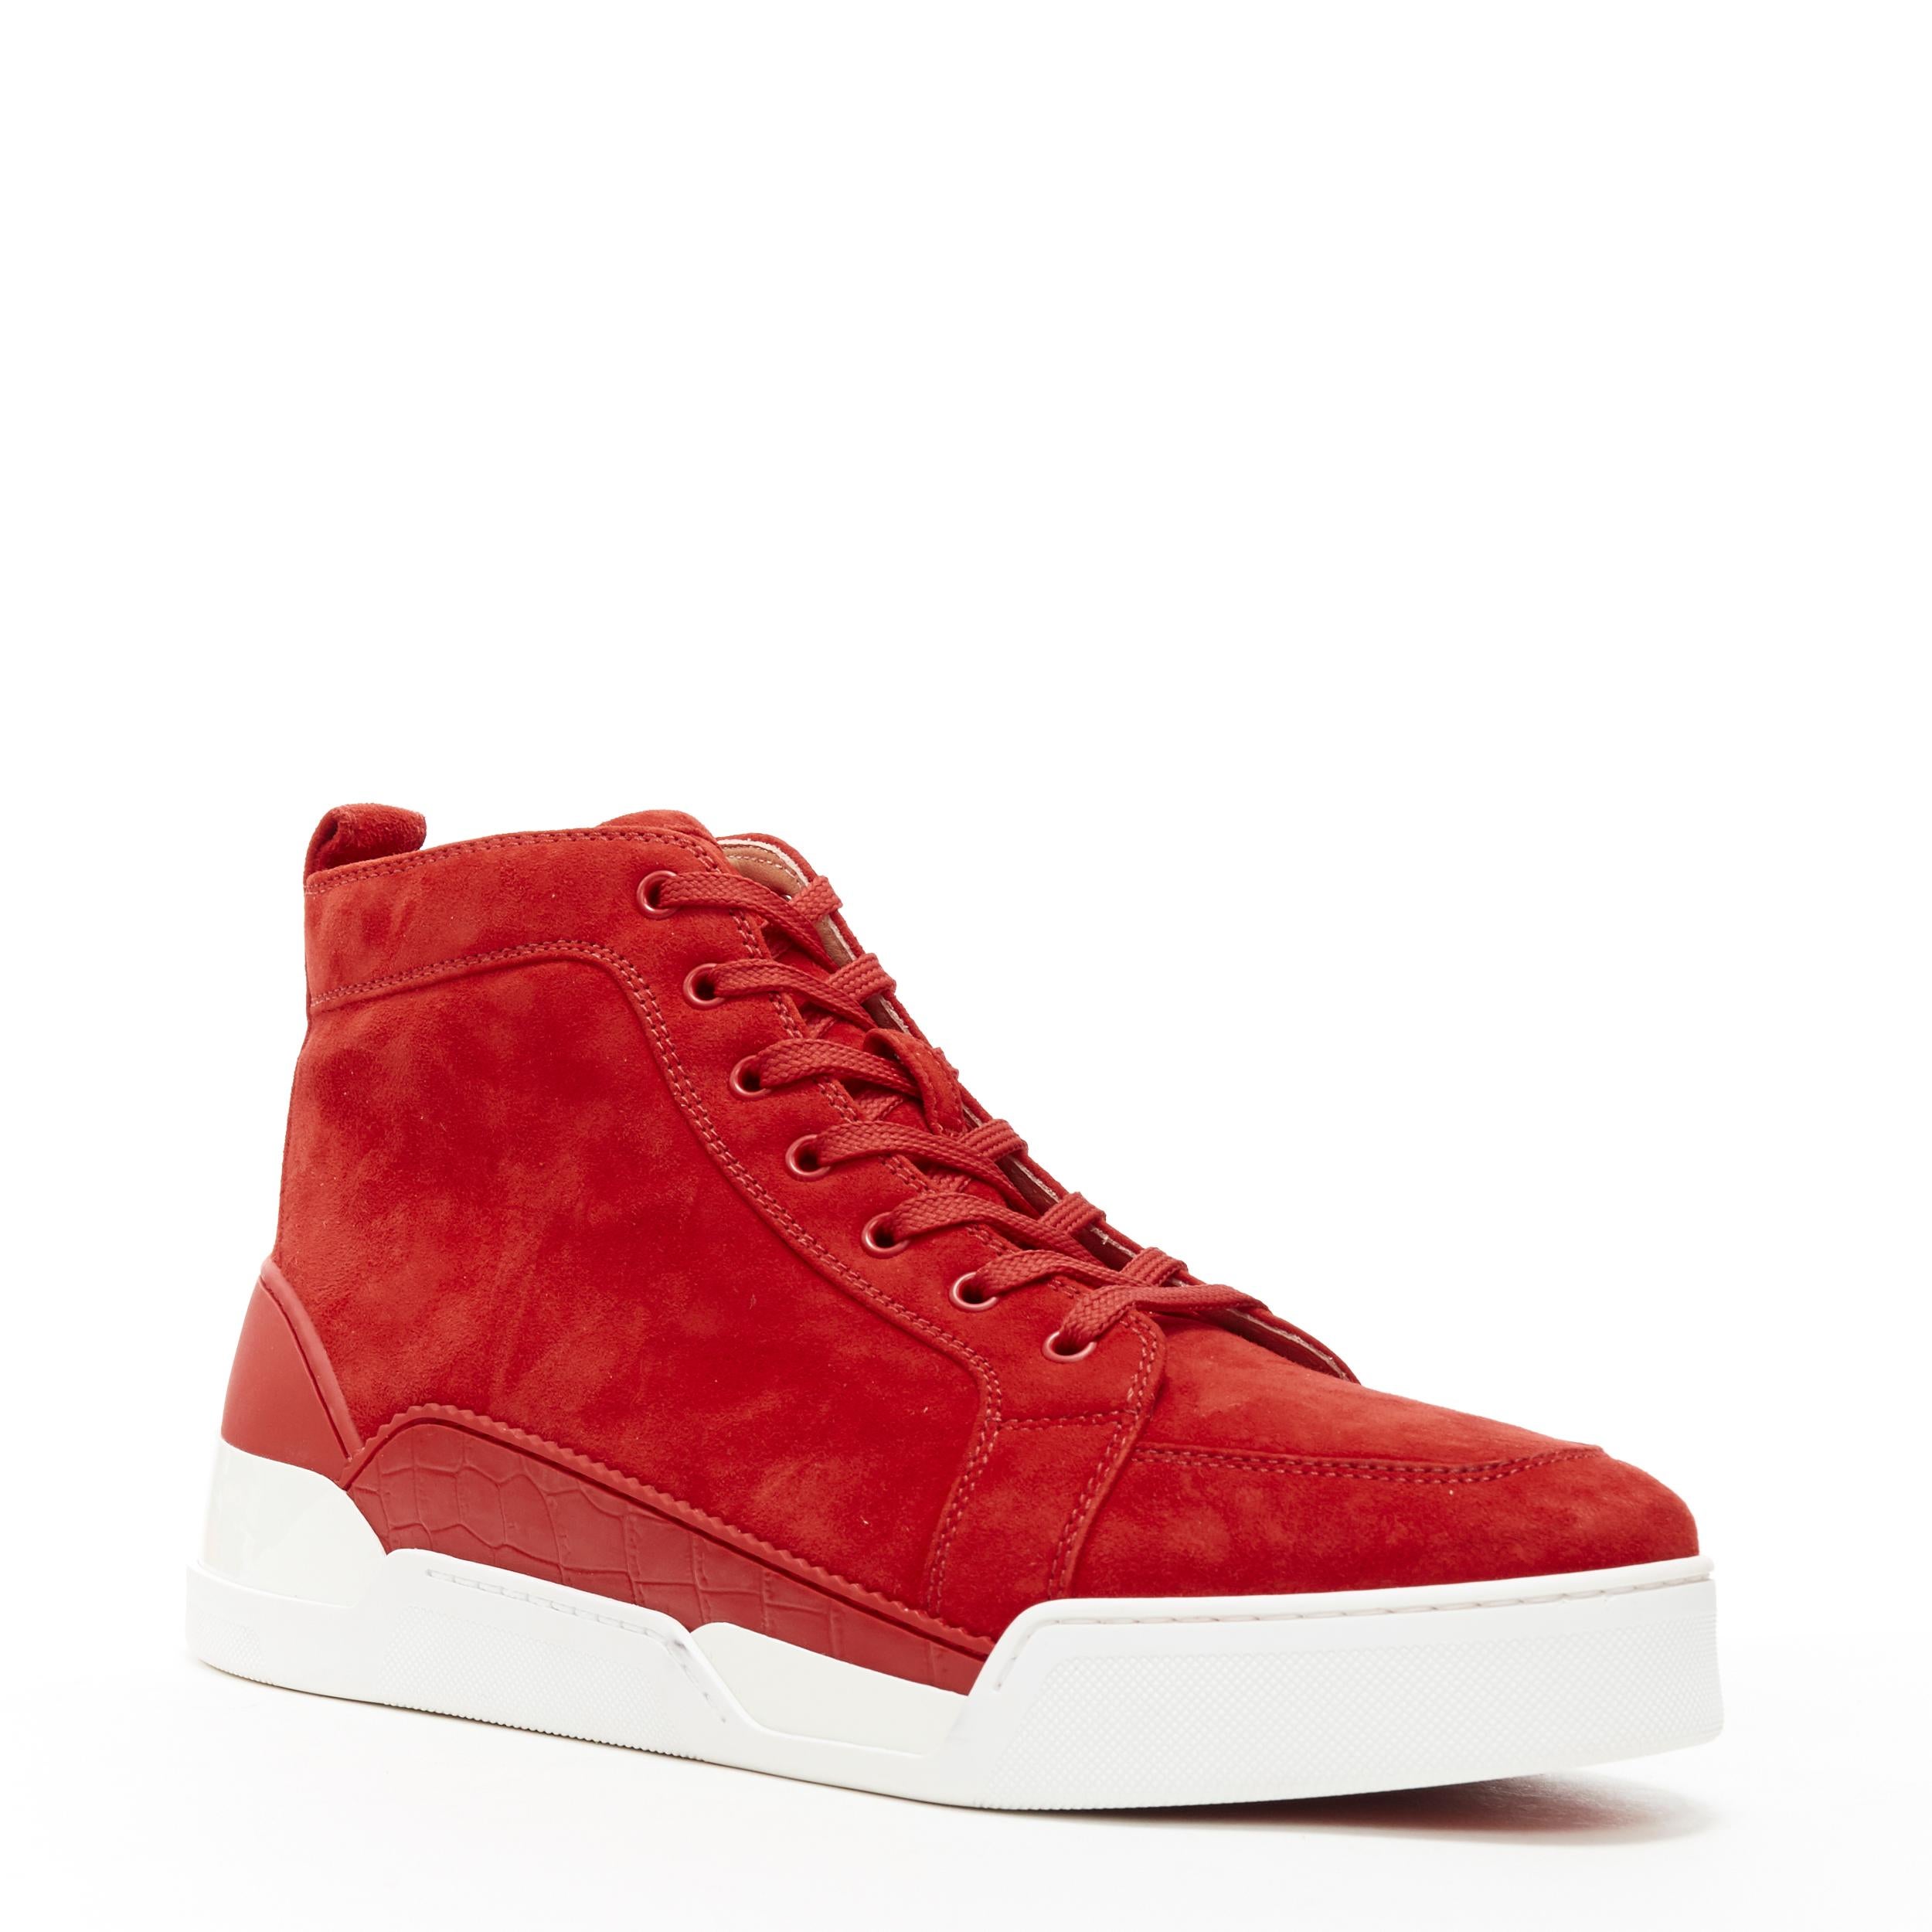 new CHRISTIAN LOUBOUTIN Rankick Flat Loubi red suede high top sneakers EU45
Brand: Christian Louboutin
Designer: Christian Louboutin
Model Name / Style: Rankick Flat
Material: Suede
Color: Red
Pattern: Solid
Closure: Lace up
Extra Detail: Style